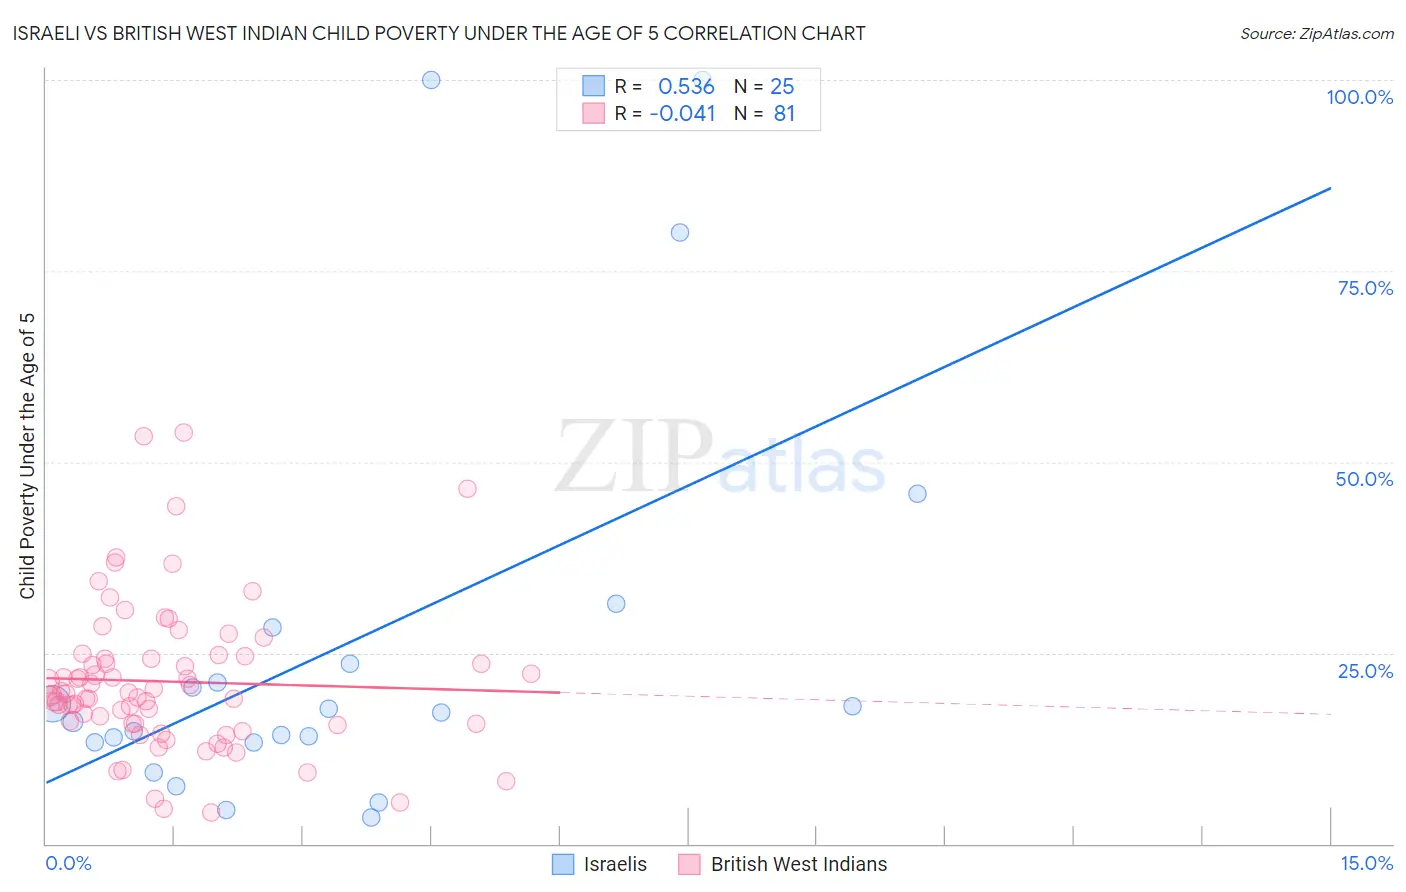 Israeli vs British West Indian Child Poverty Under the Age of 5